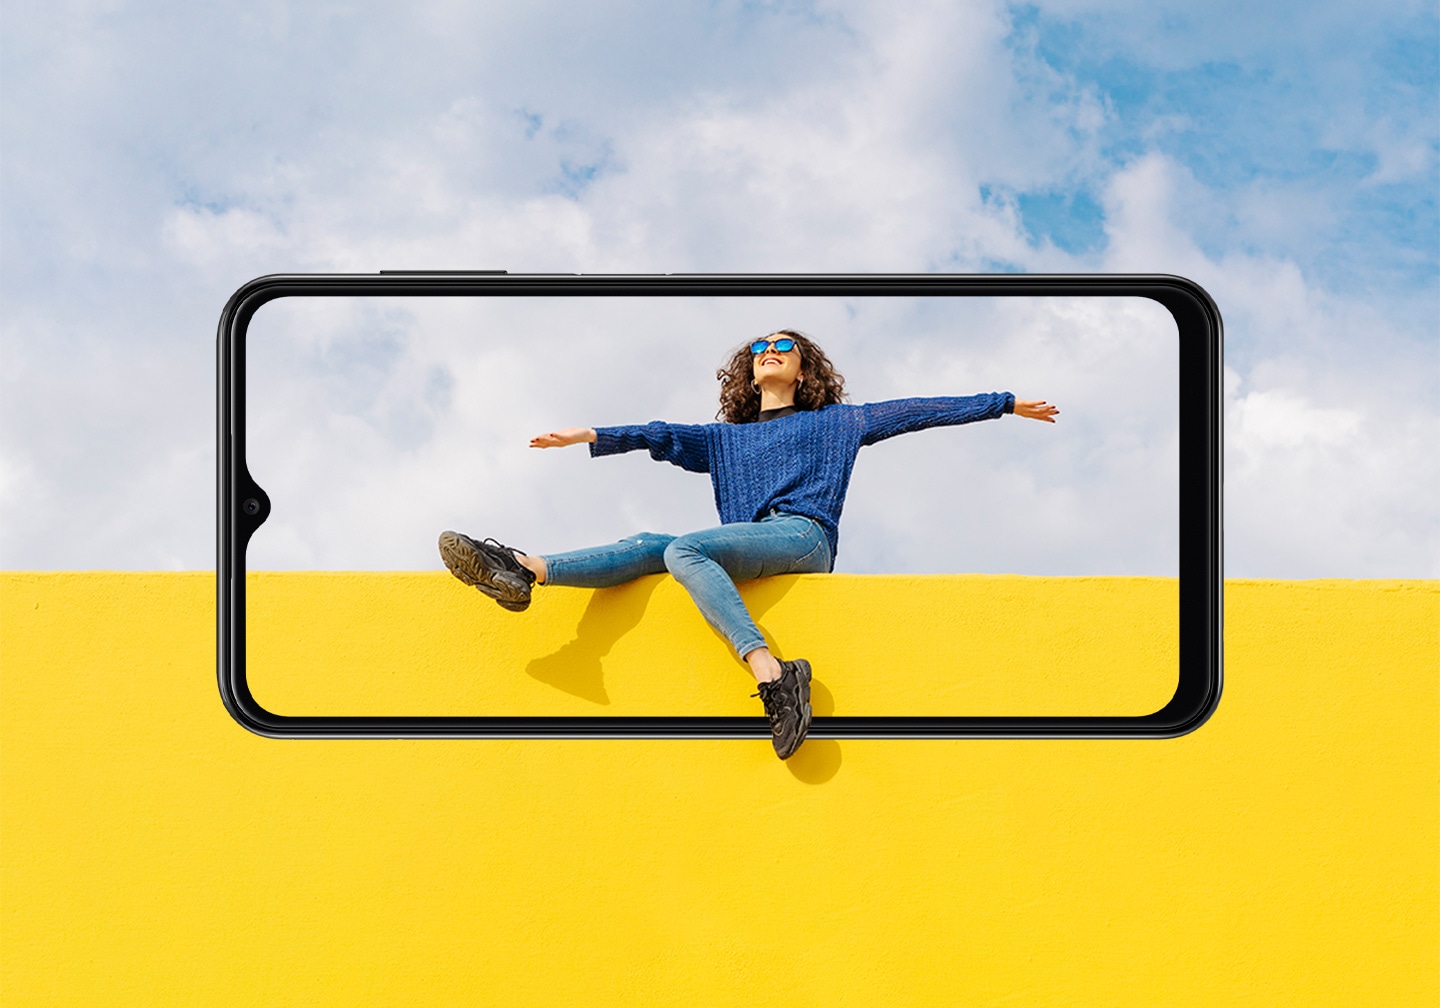 Galaxy A13 seen from the front. A young woman sitting on yellow wall against cloudy sky looking up. Her legs and the wall and sky extend outside of the display.